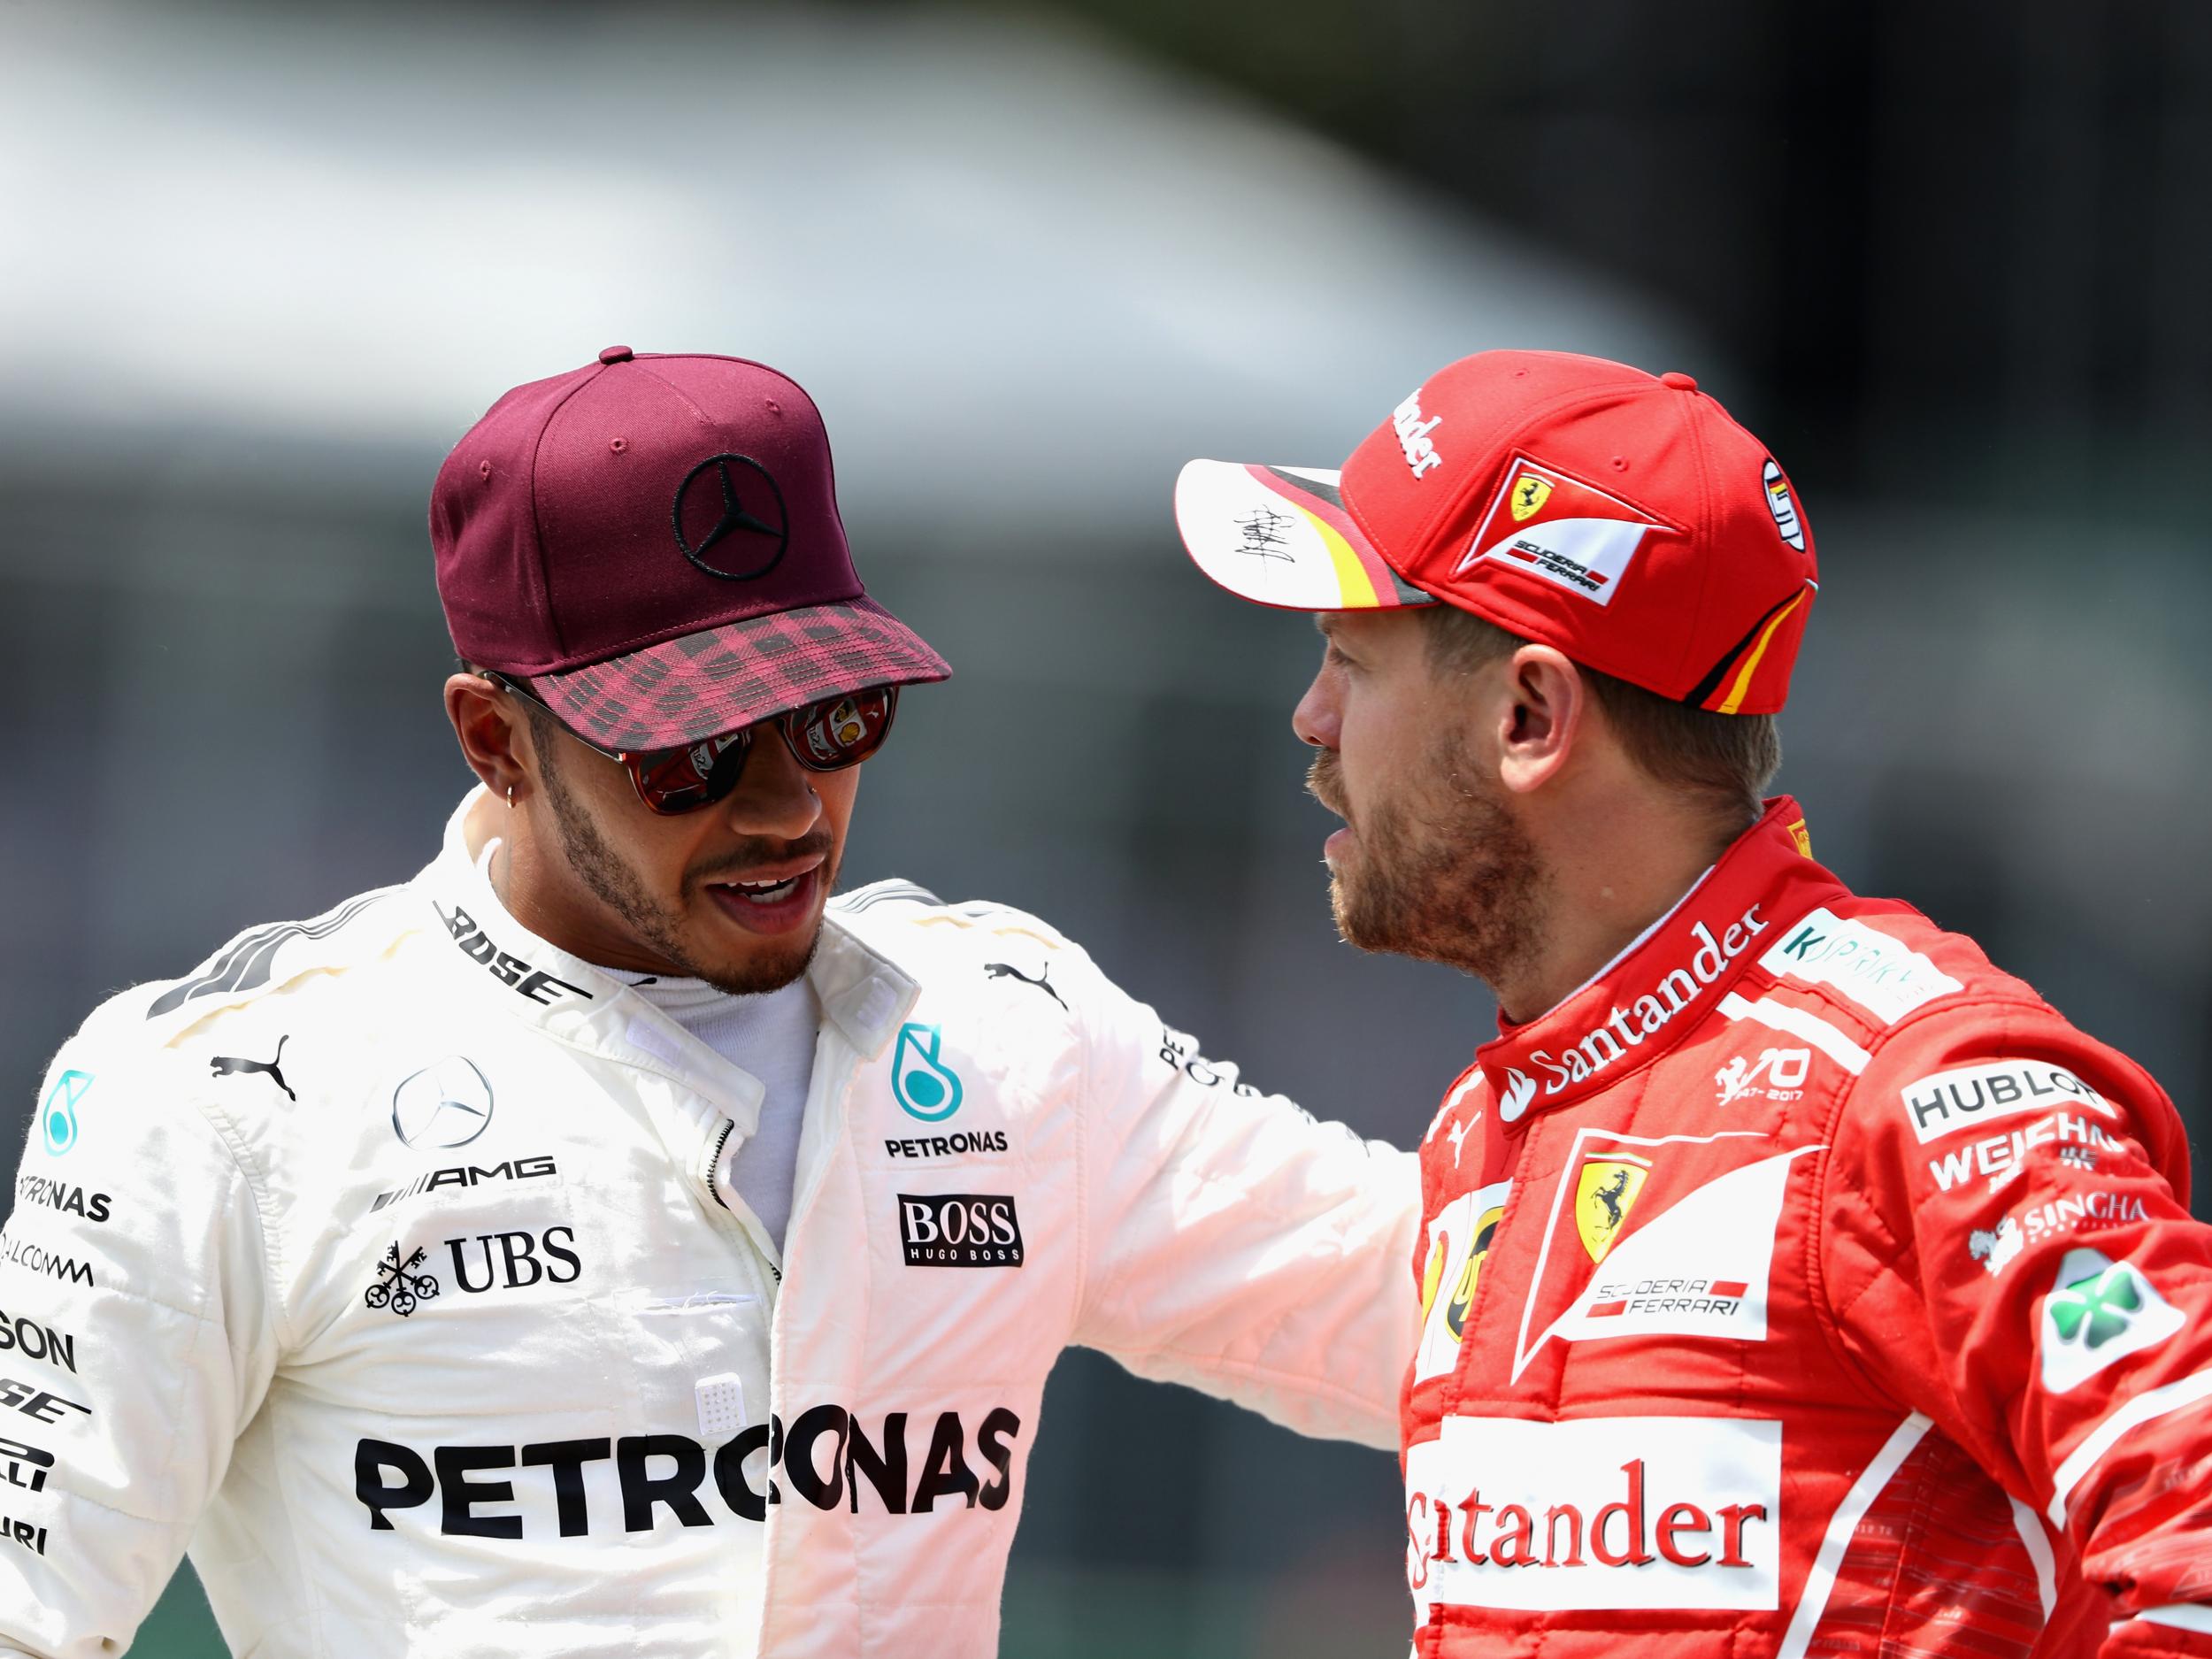 Hamilton wants the pair to race as hard as they've always done